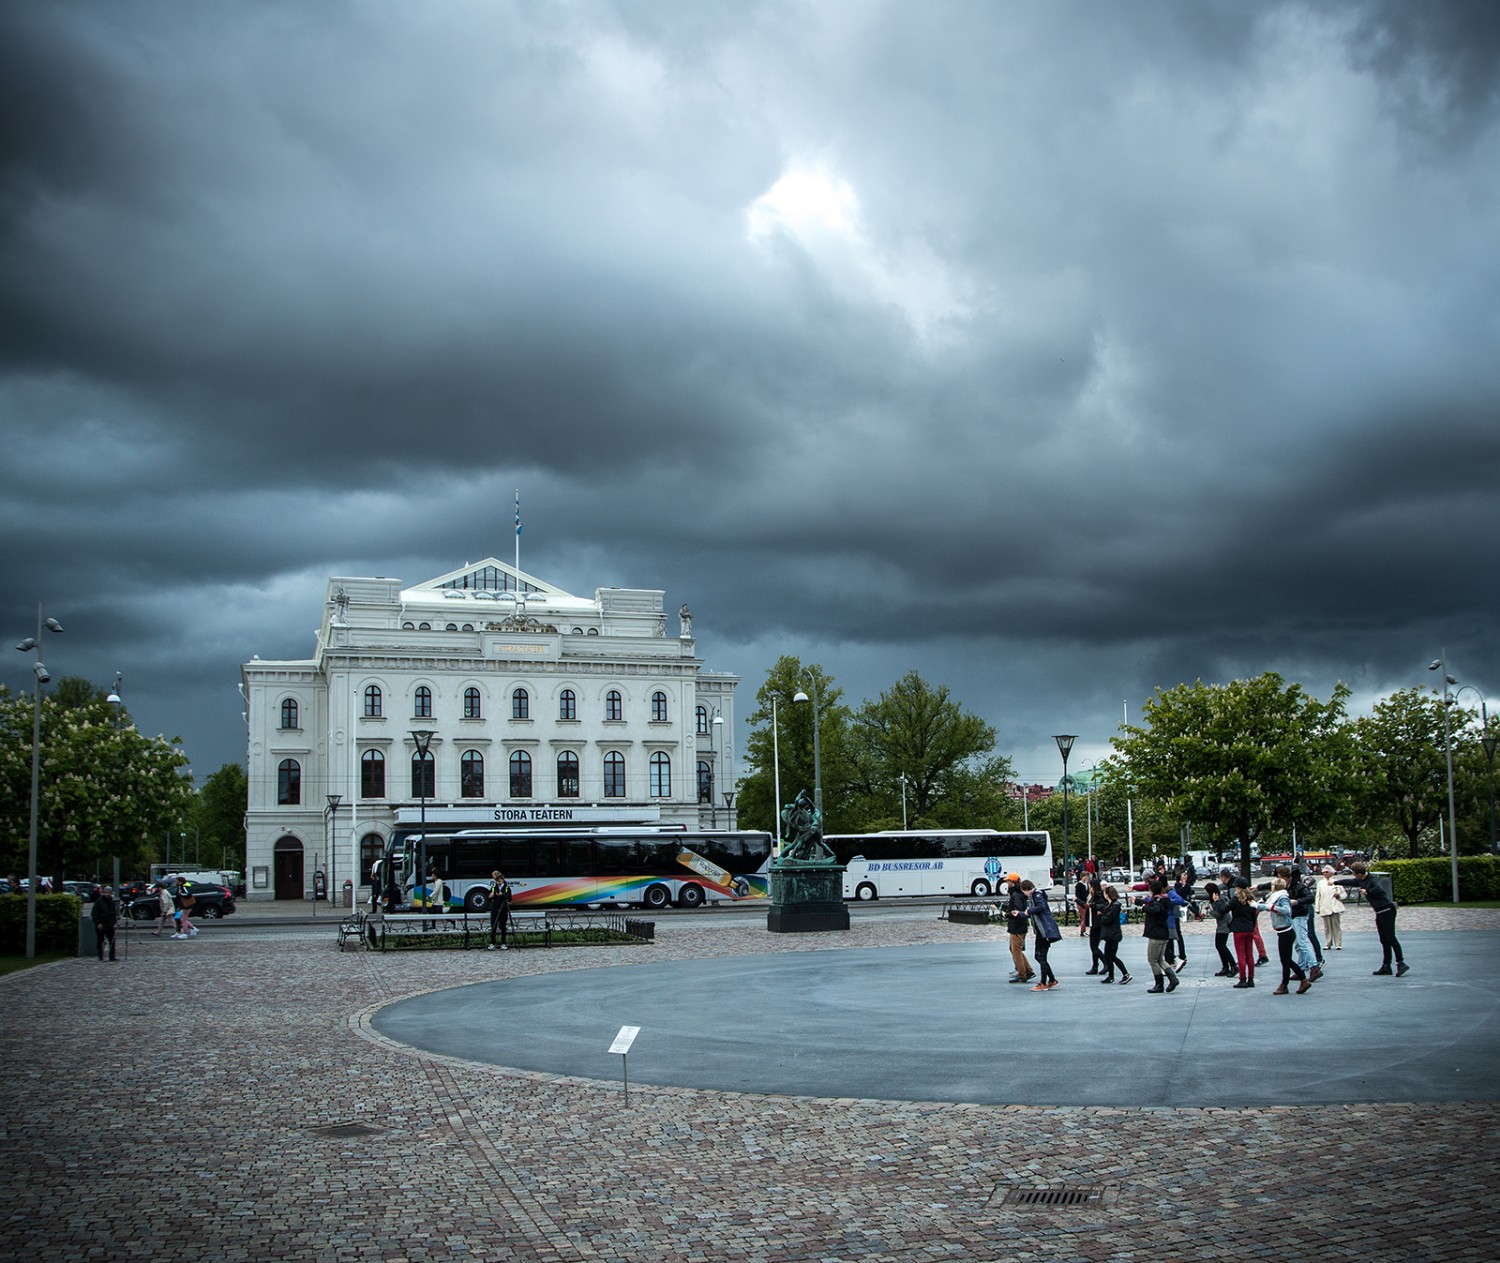 Clouds over Stora Teatern in Malmö. In the corner av the picture a group of people are making movements with their arms.